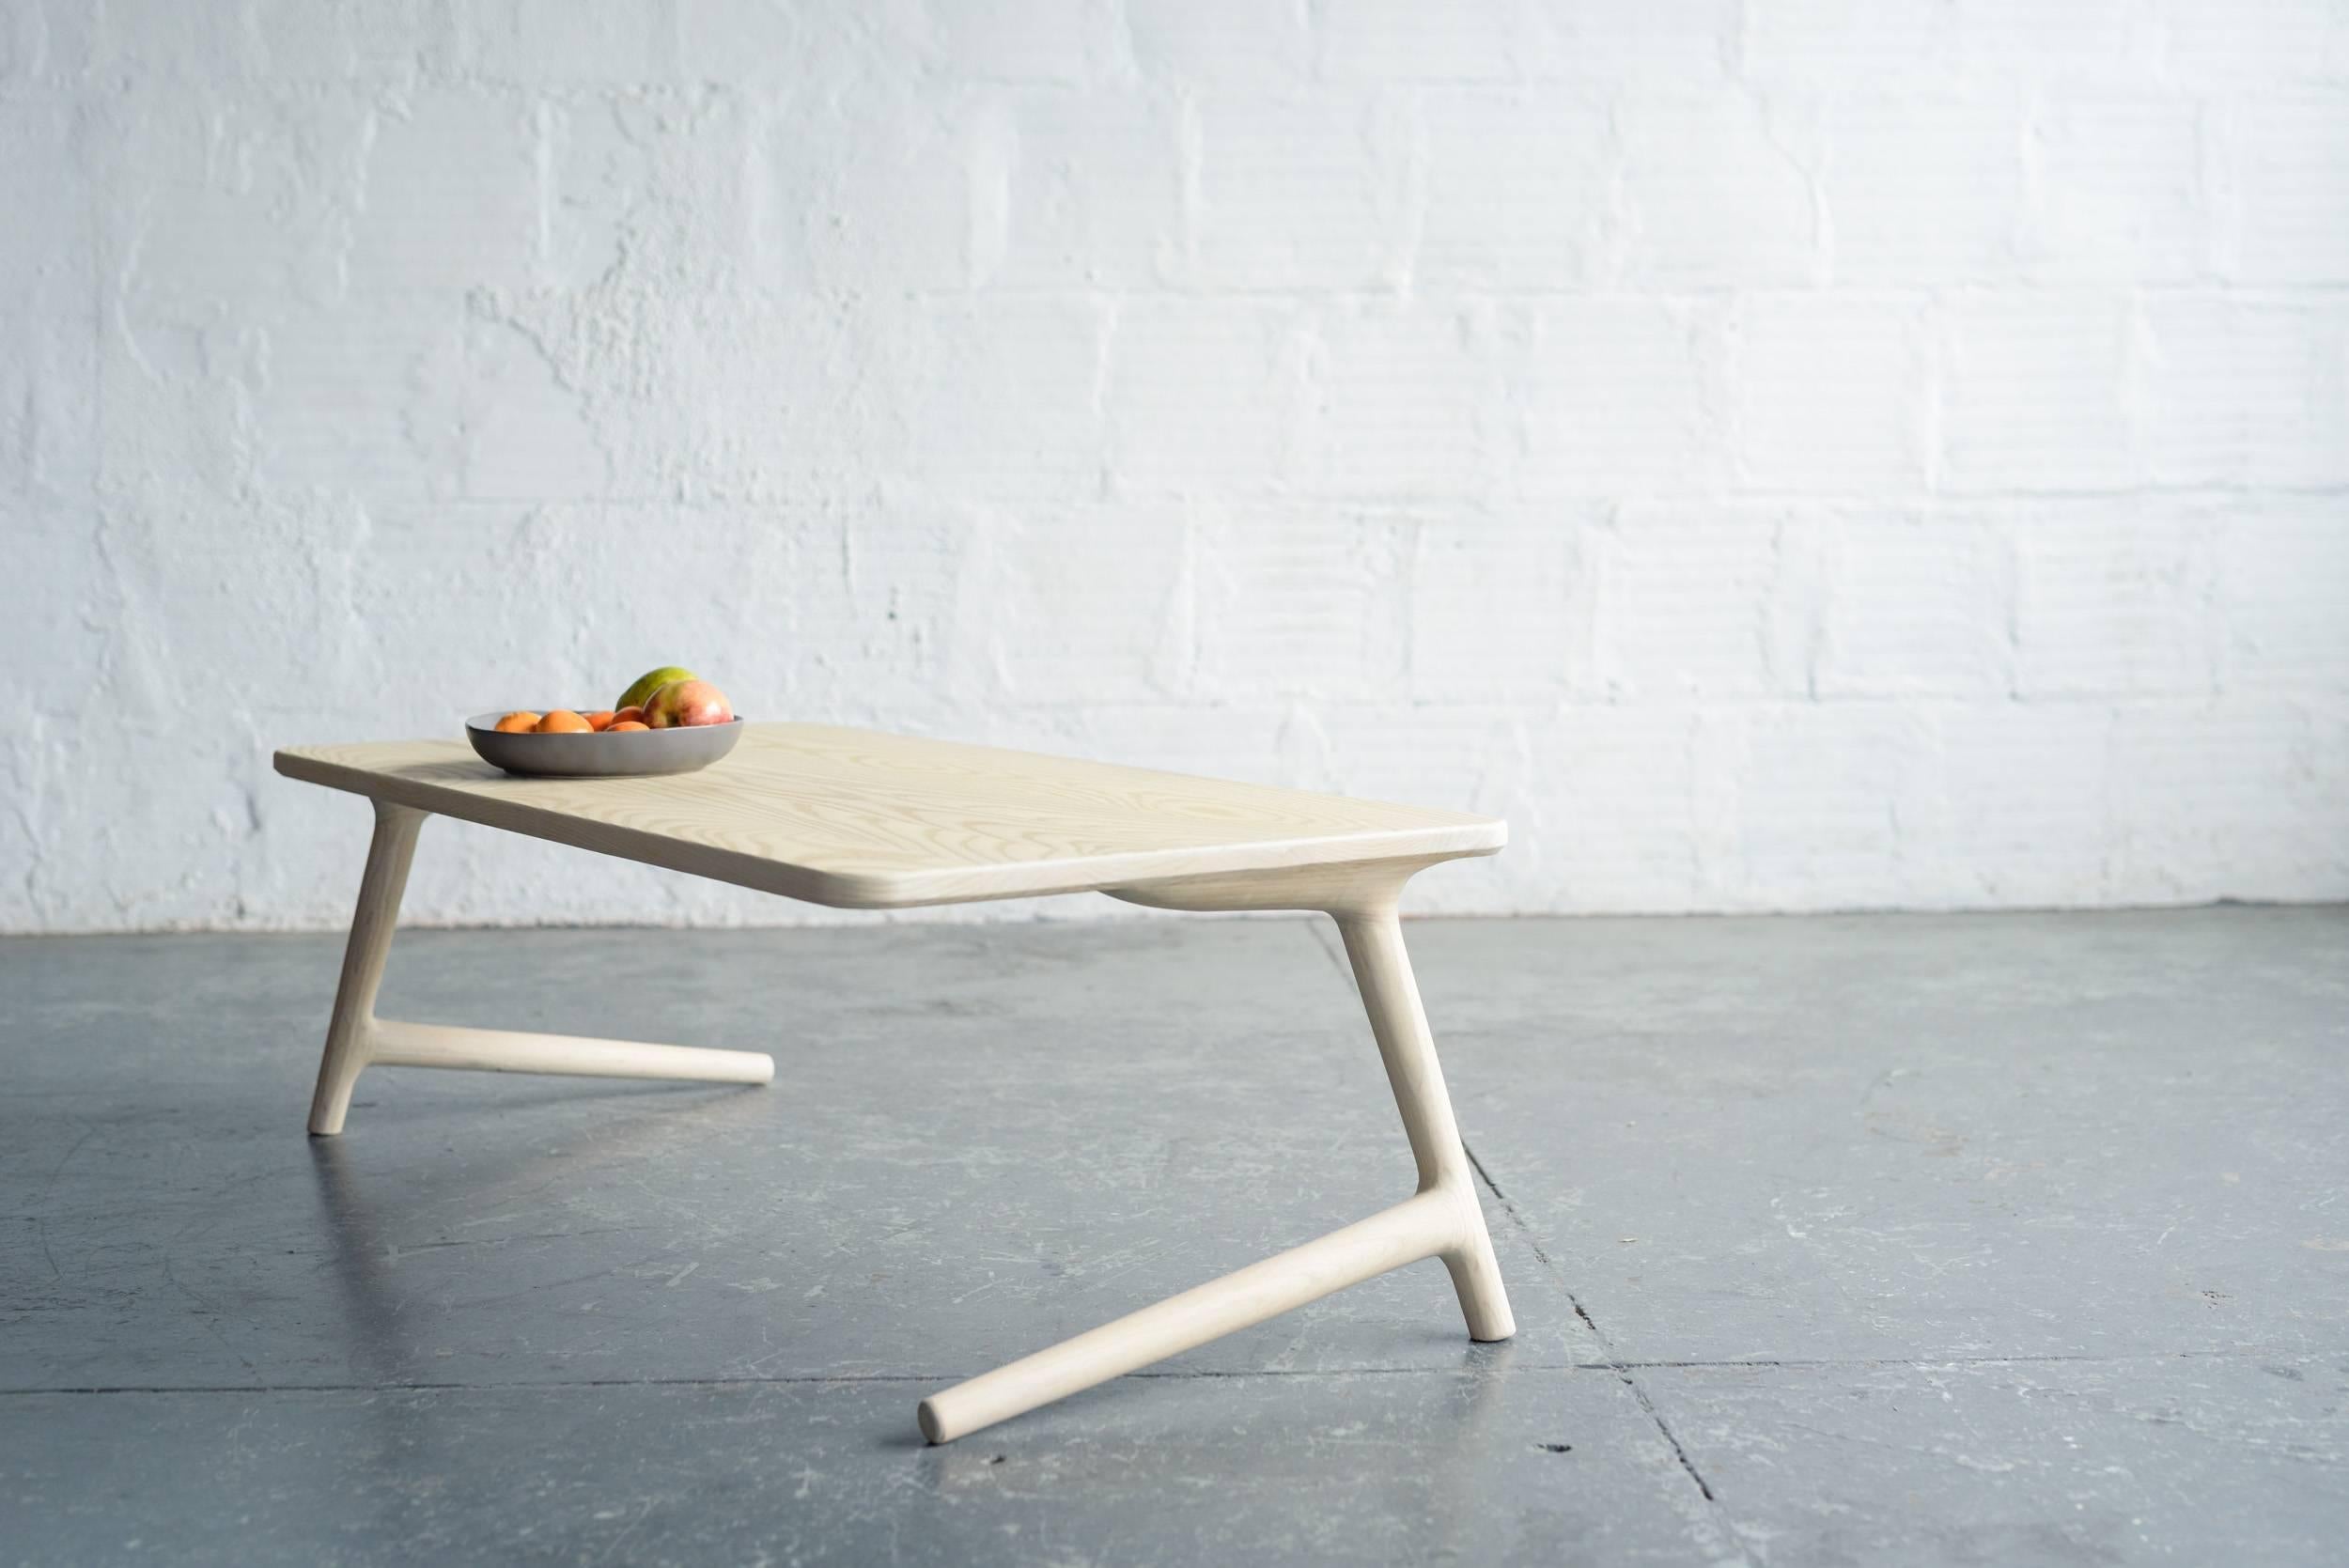 A beautiful, minimal coffee or cocktail table for your home in the Mid-Century Modern or Danish style. Handmade from White Ash wood. The legs give this piece a light, airy feel, while strong joinery keeps it stable and sturdy. (See the second photo